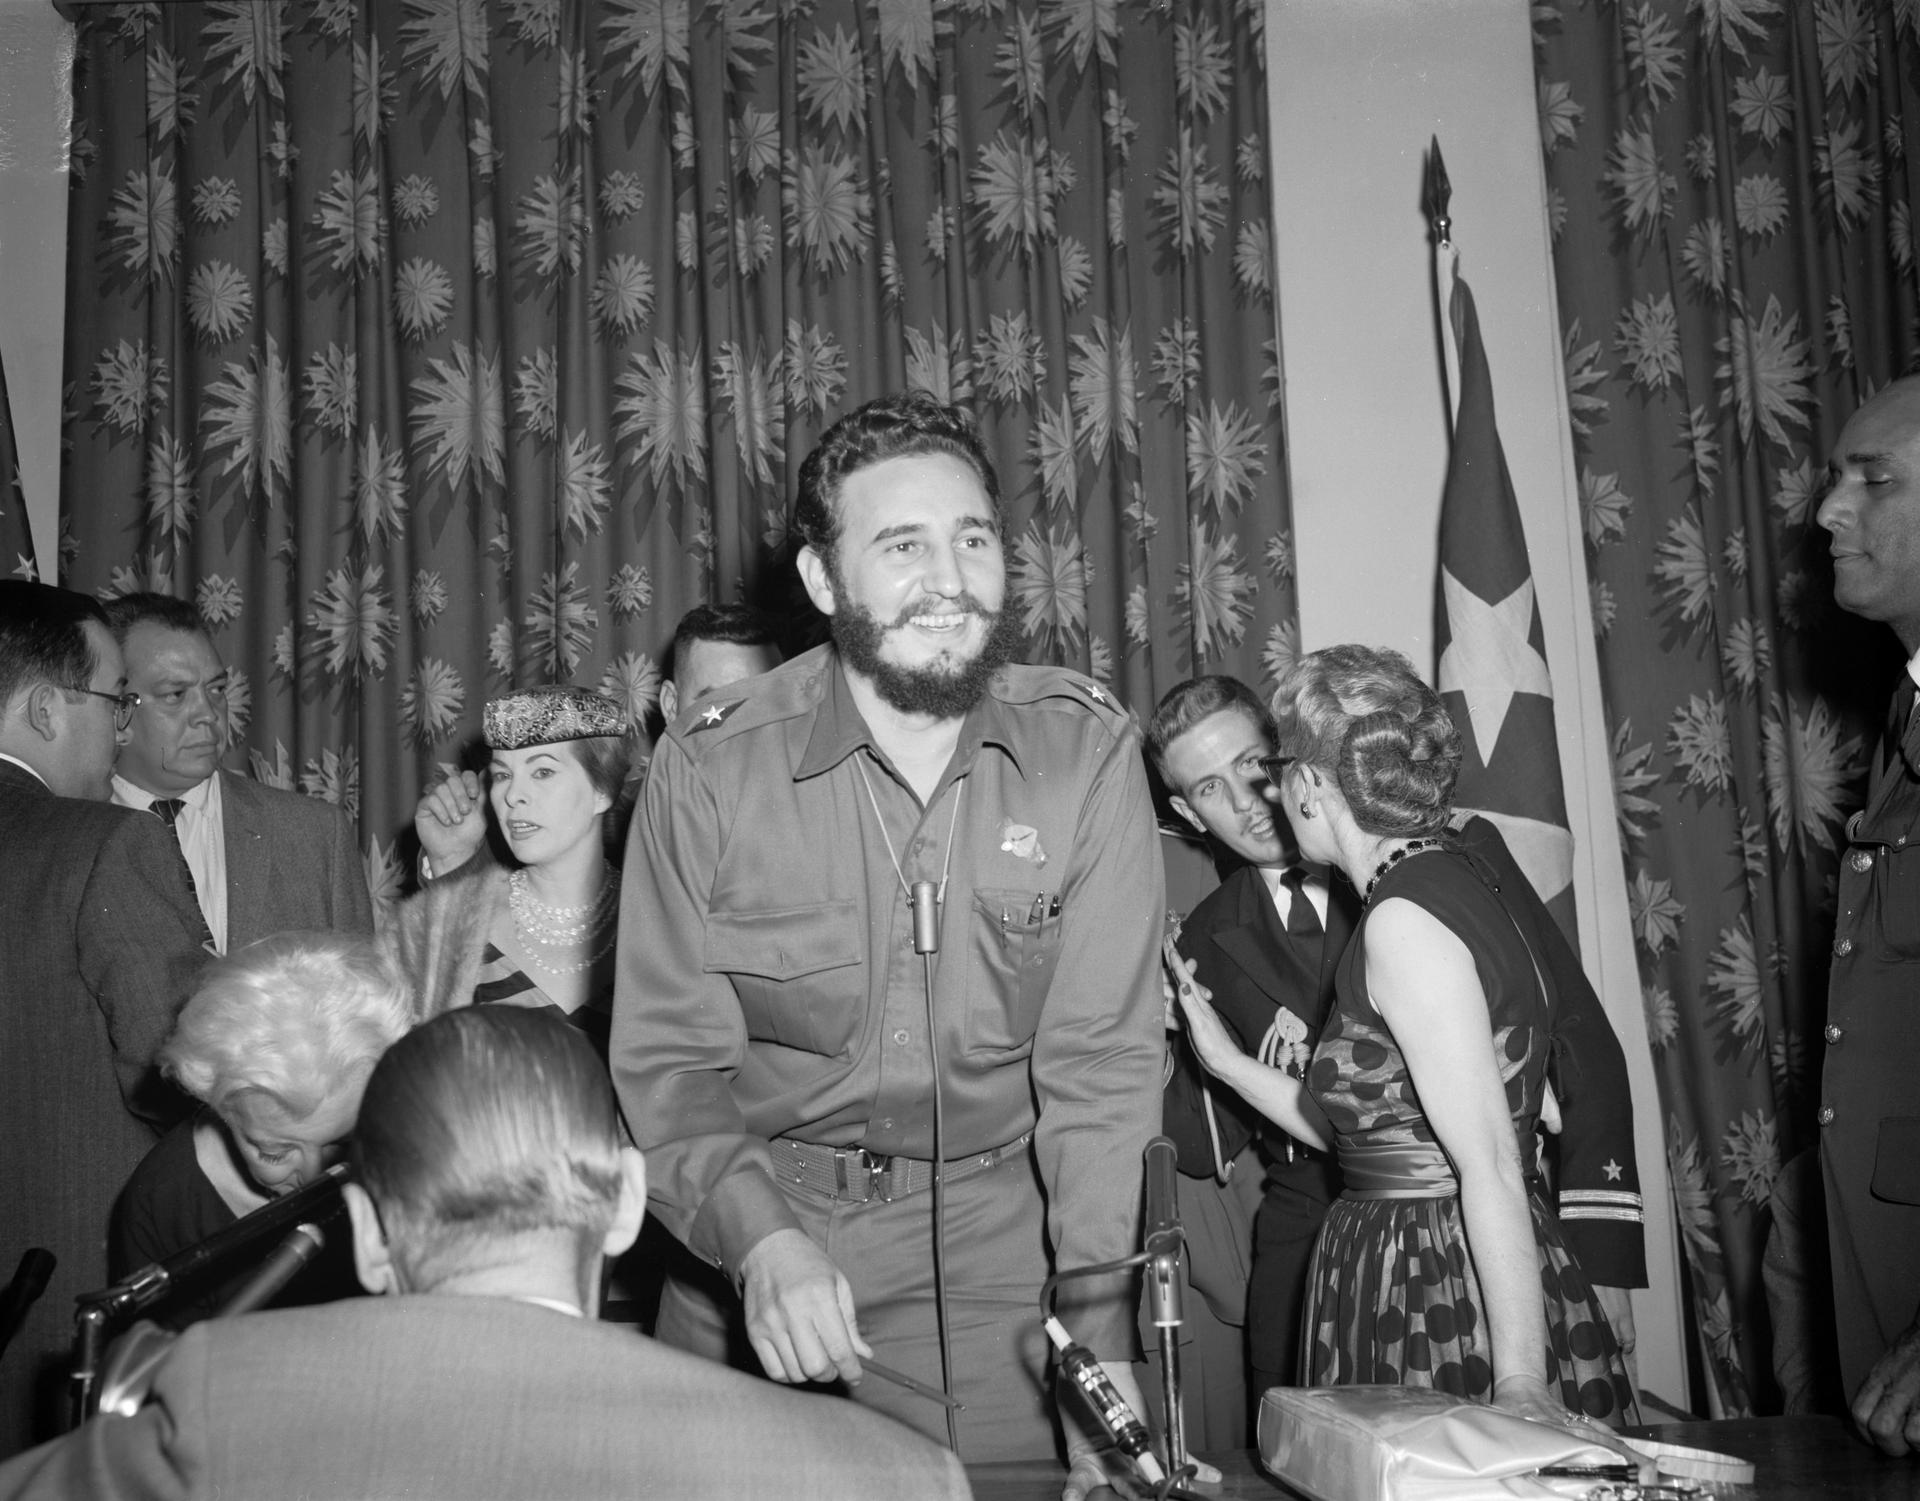 April 21, 1959 - New York City, NY - Fidel Castro speaks before the Women Lawyers Association of the State of New York at the Statler Hilton.